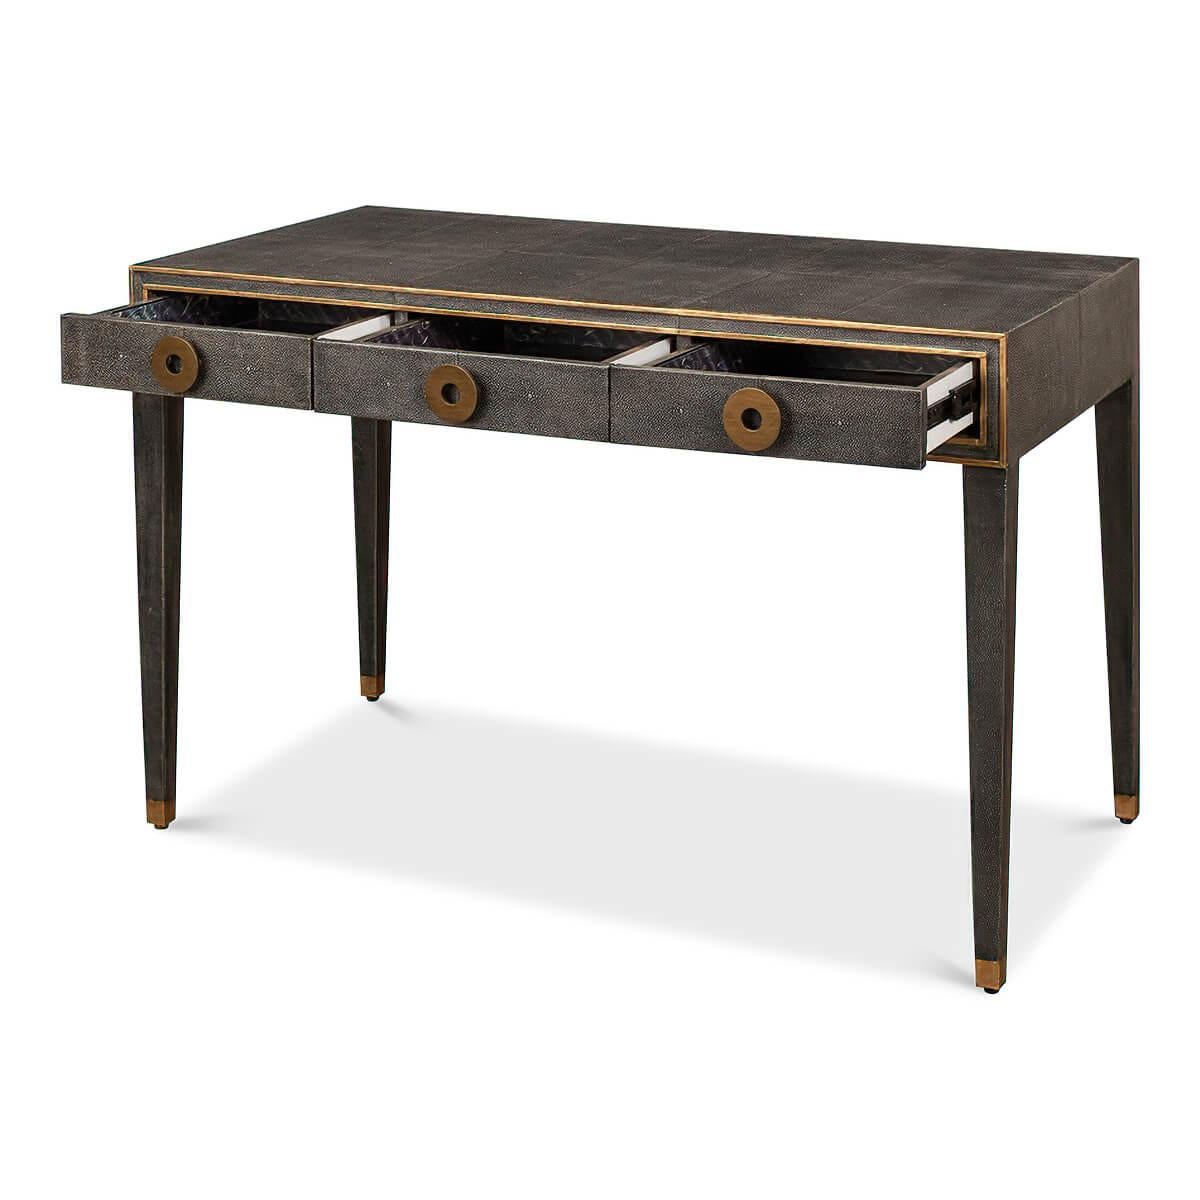 A French Art Deco style shagreen embossed leather desk in a dark antiqued grey. With gilded highlight trim, three frieze drawers with modern round pulls, and raised on square tapered legs.

Dimensions: 49